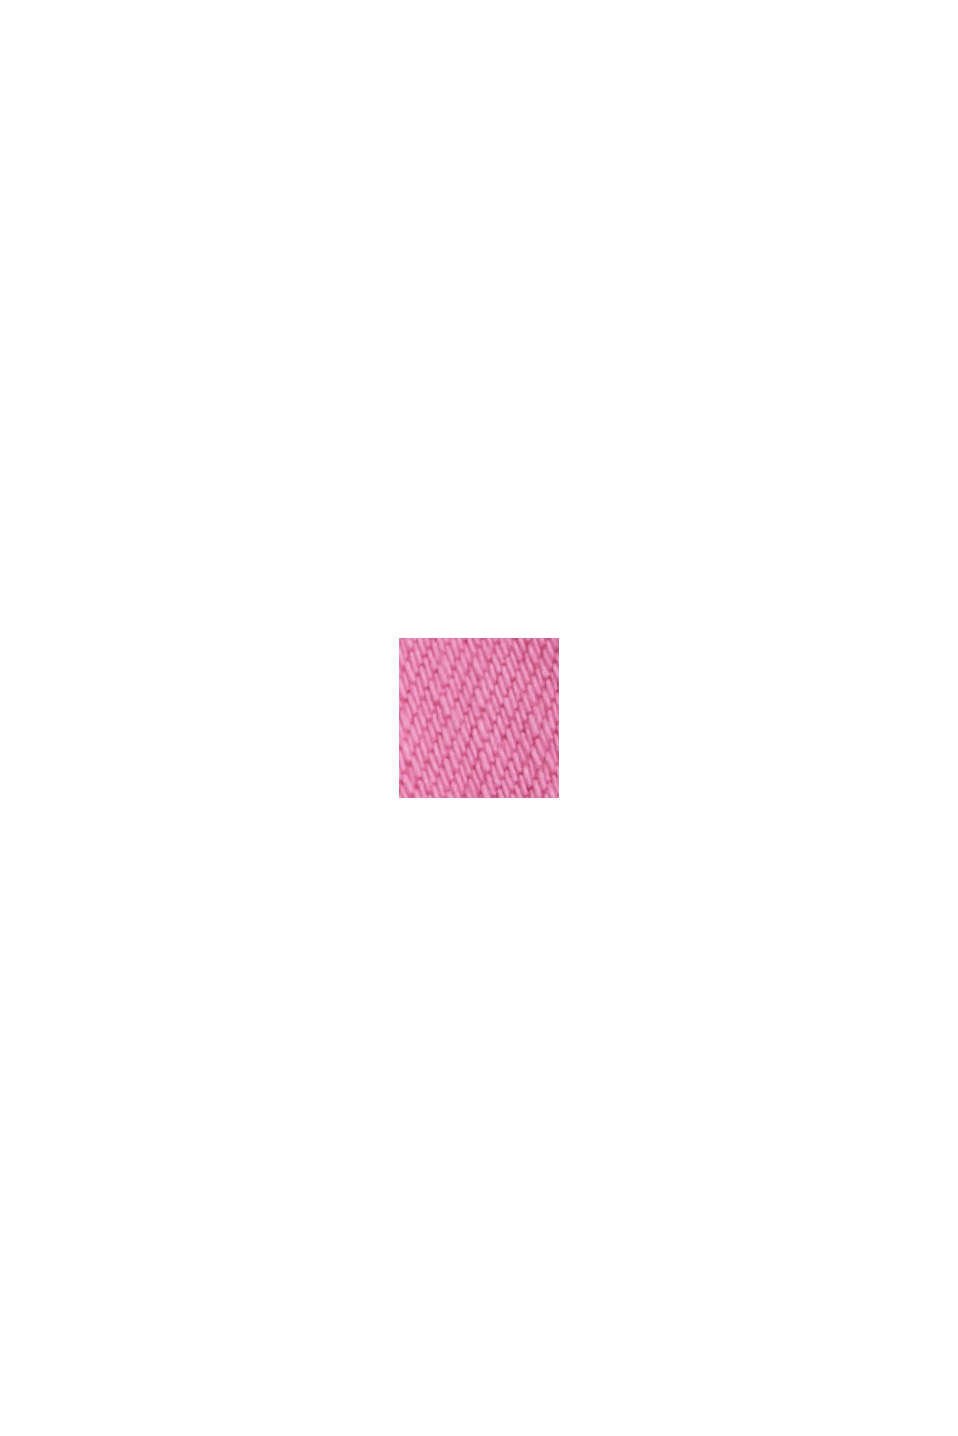 Pants woven high rise straight, PINK, swatch